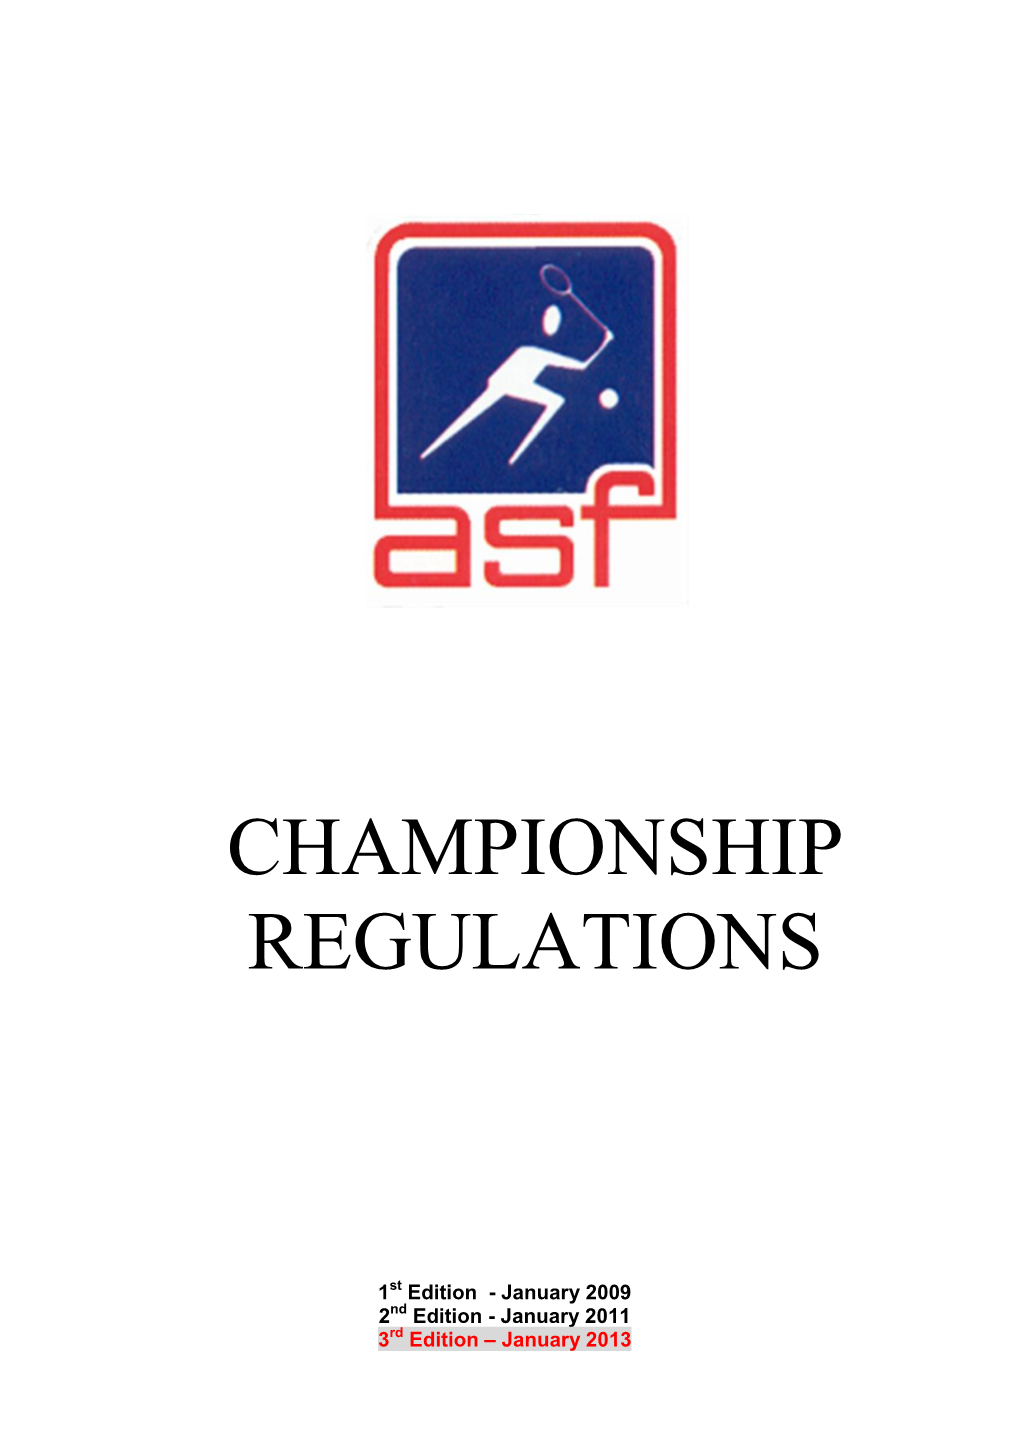 Championship Regulations Are Divided Into the Following Sections: SECTION 1 Contains Information Applicable to All ASF Championships